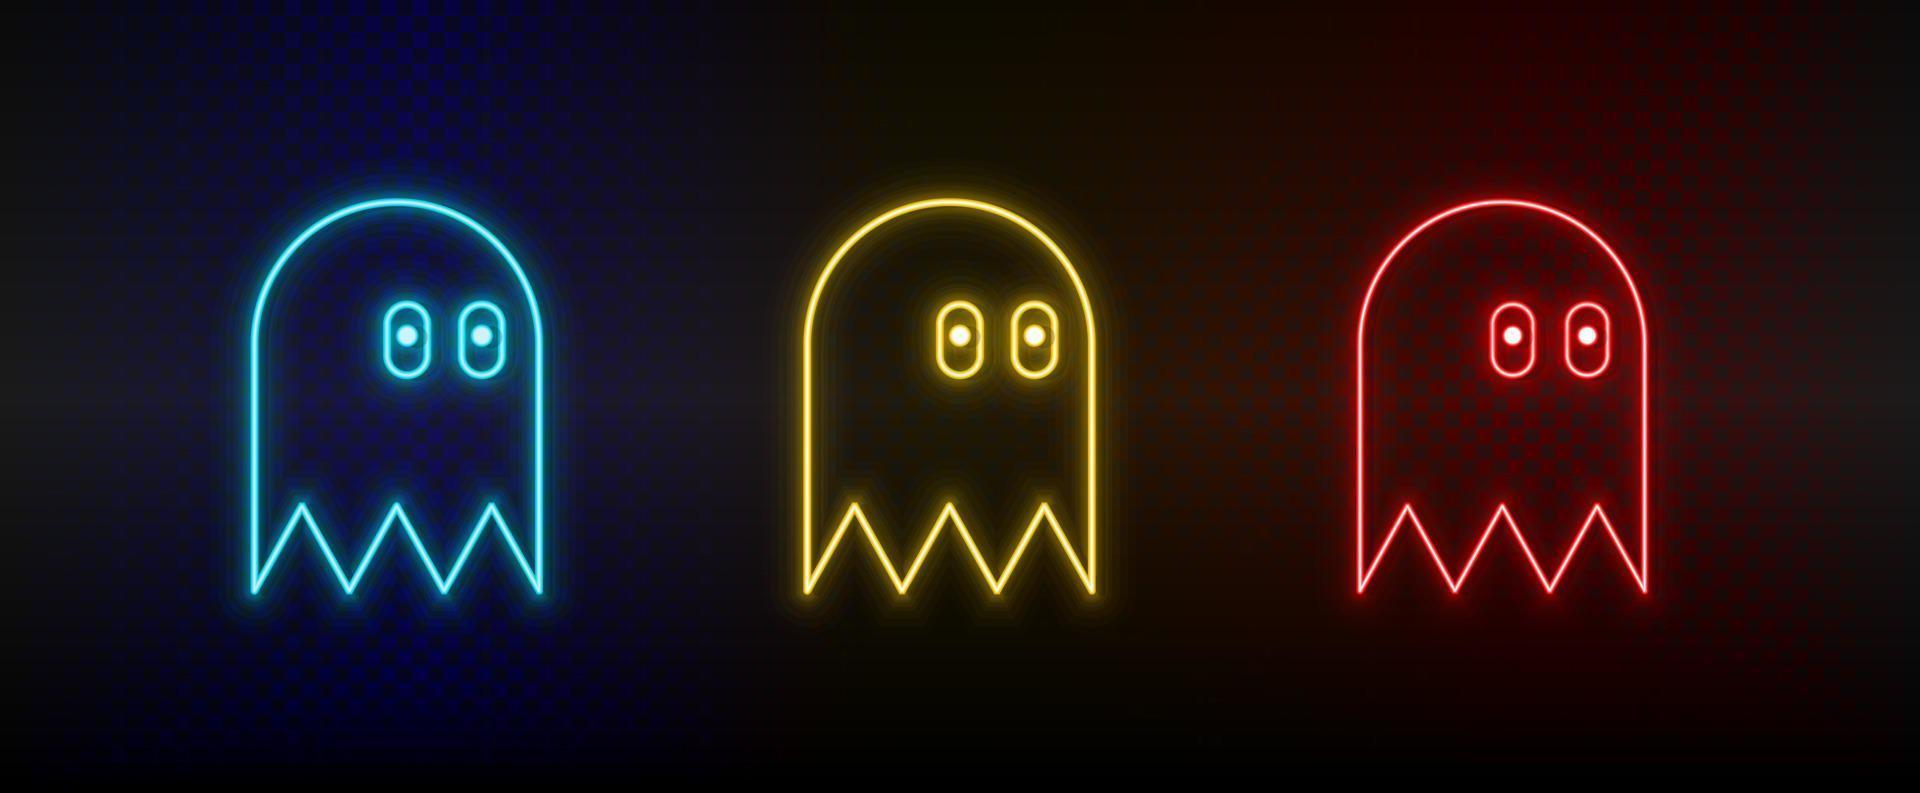 Neon icons. Game character retro arcade. Set of red, blue, yellow neon vector icon on darken background